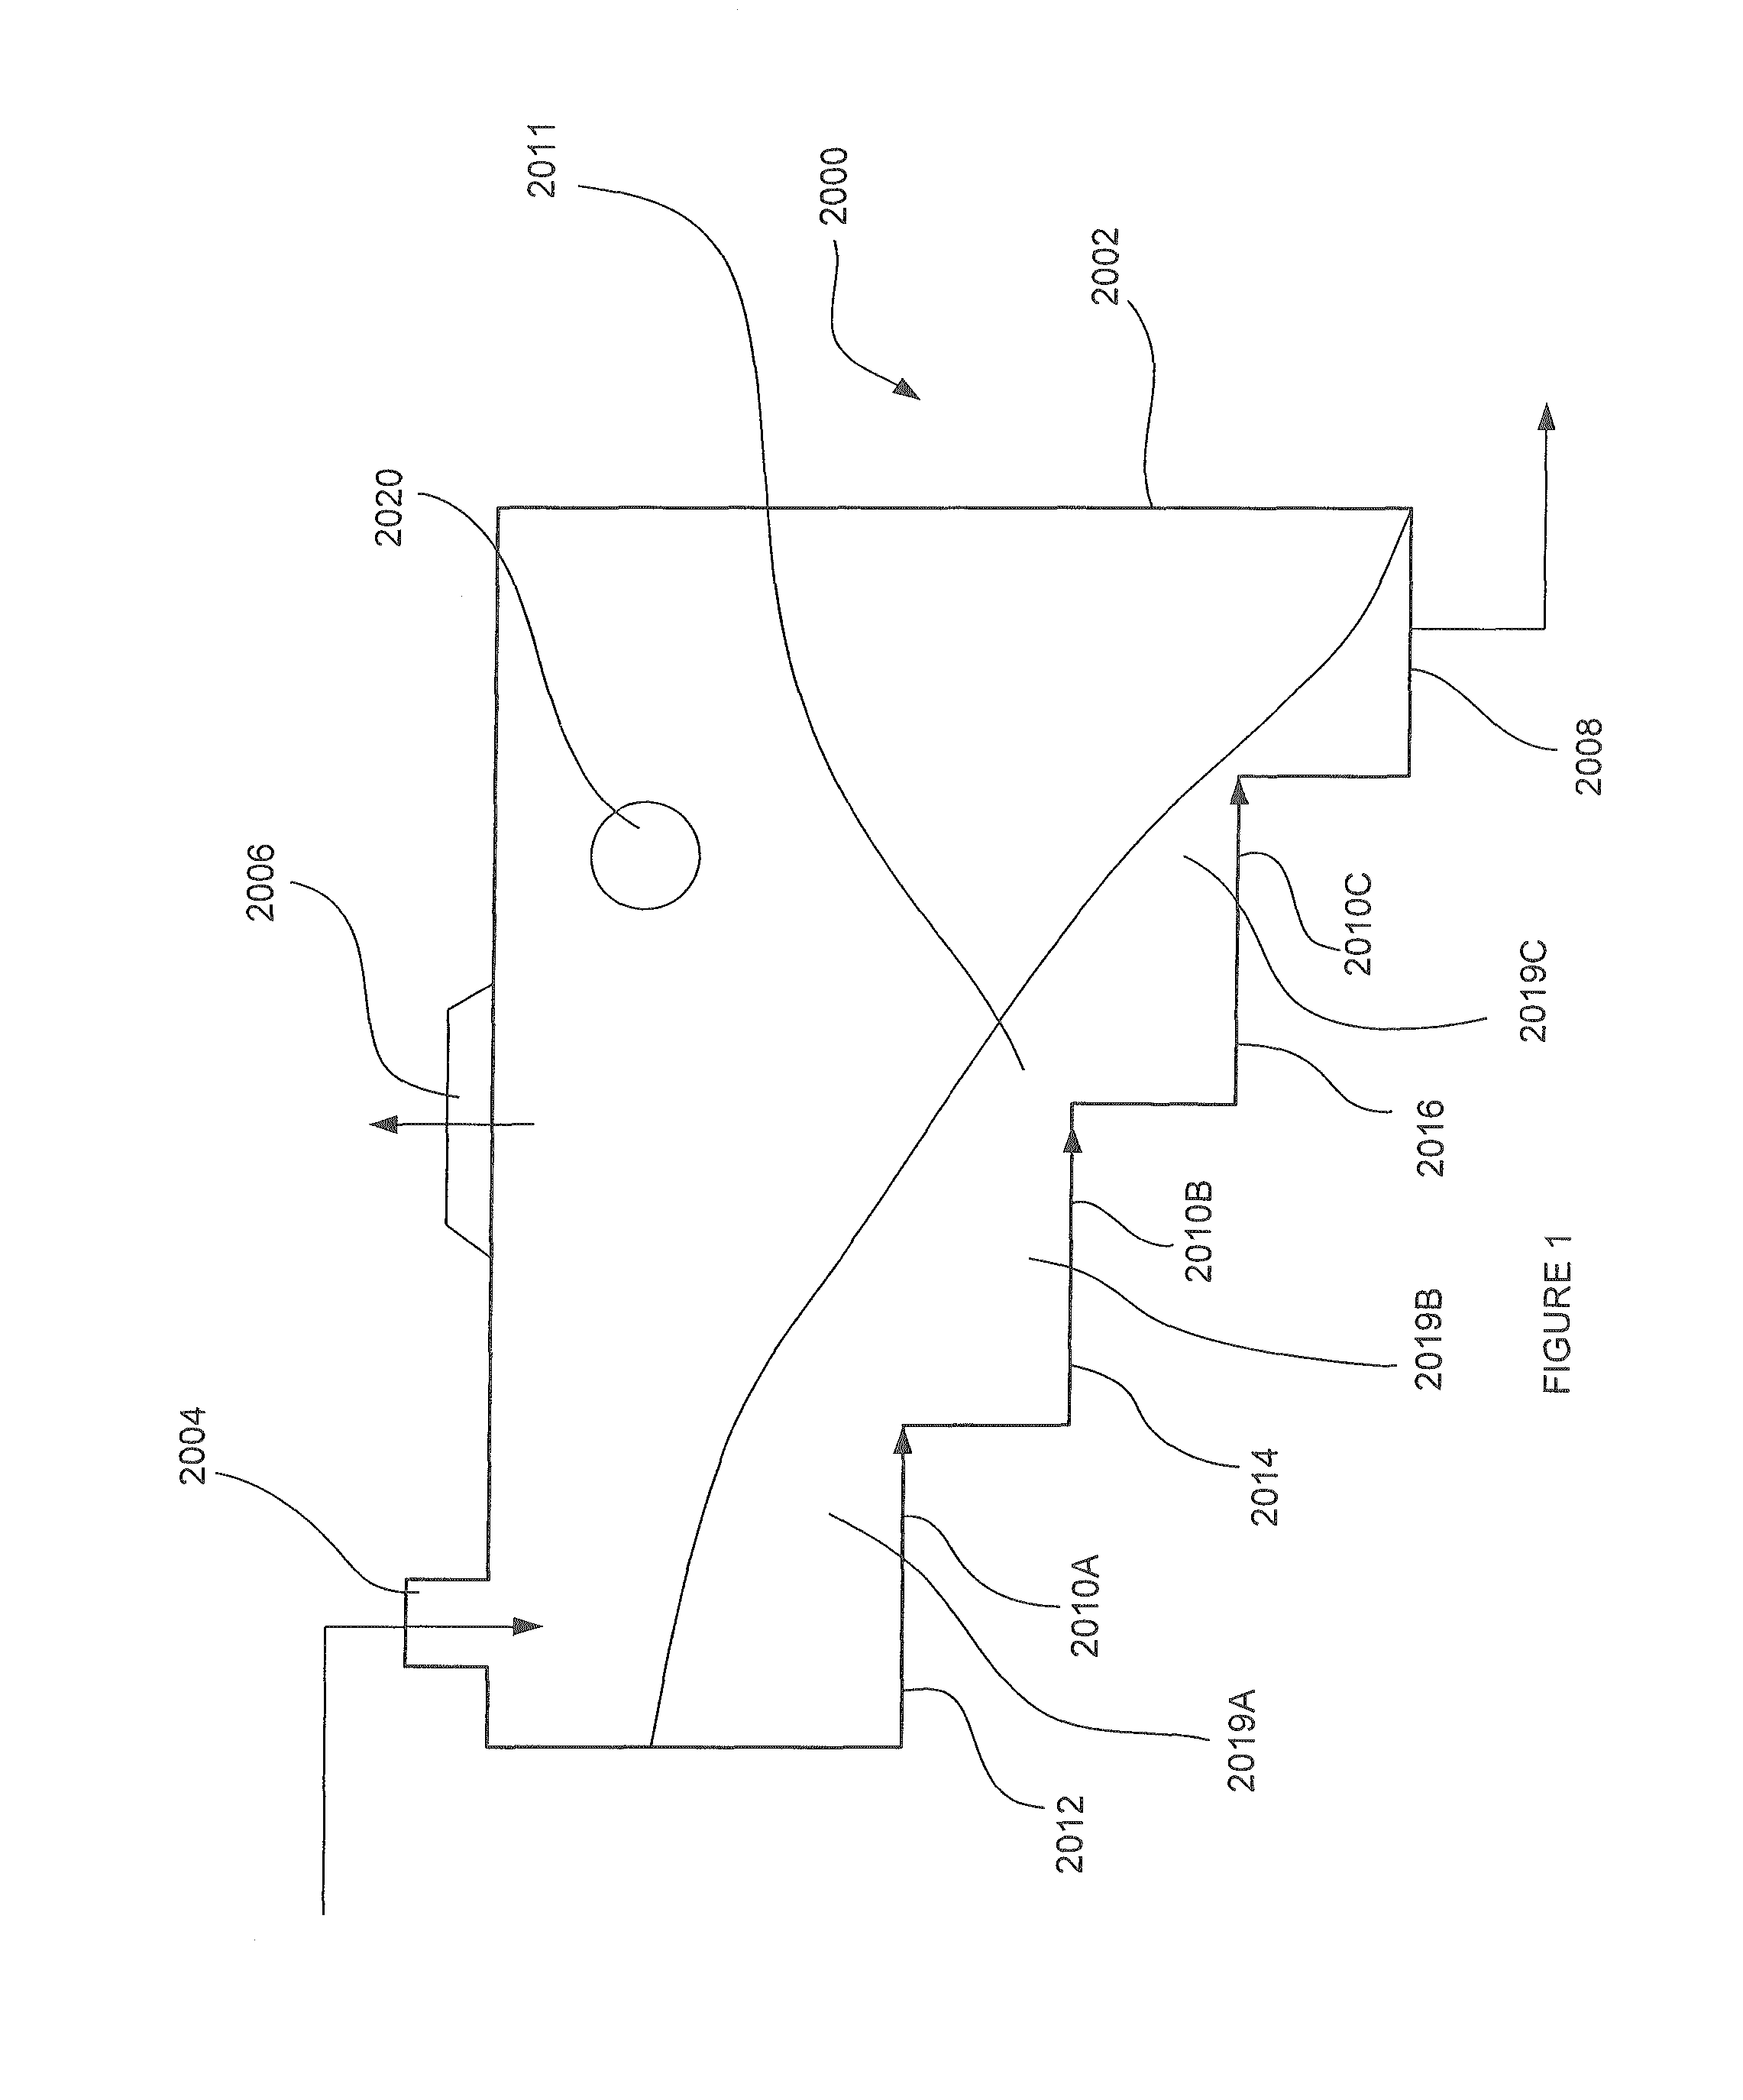 Horizontally-oriented gasifier with lateral transfer system